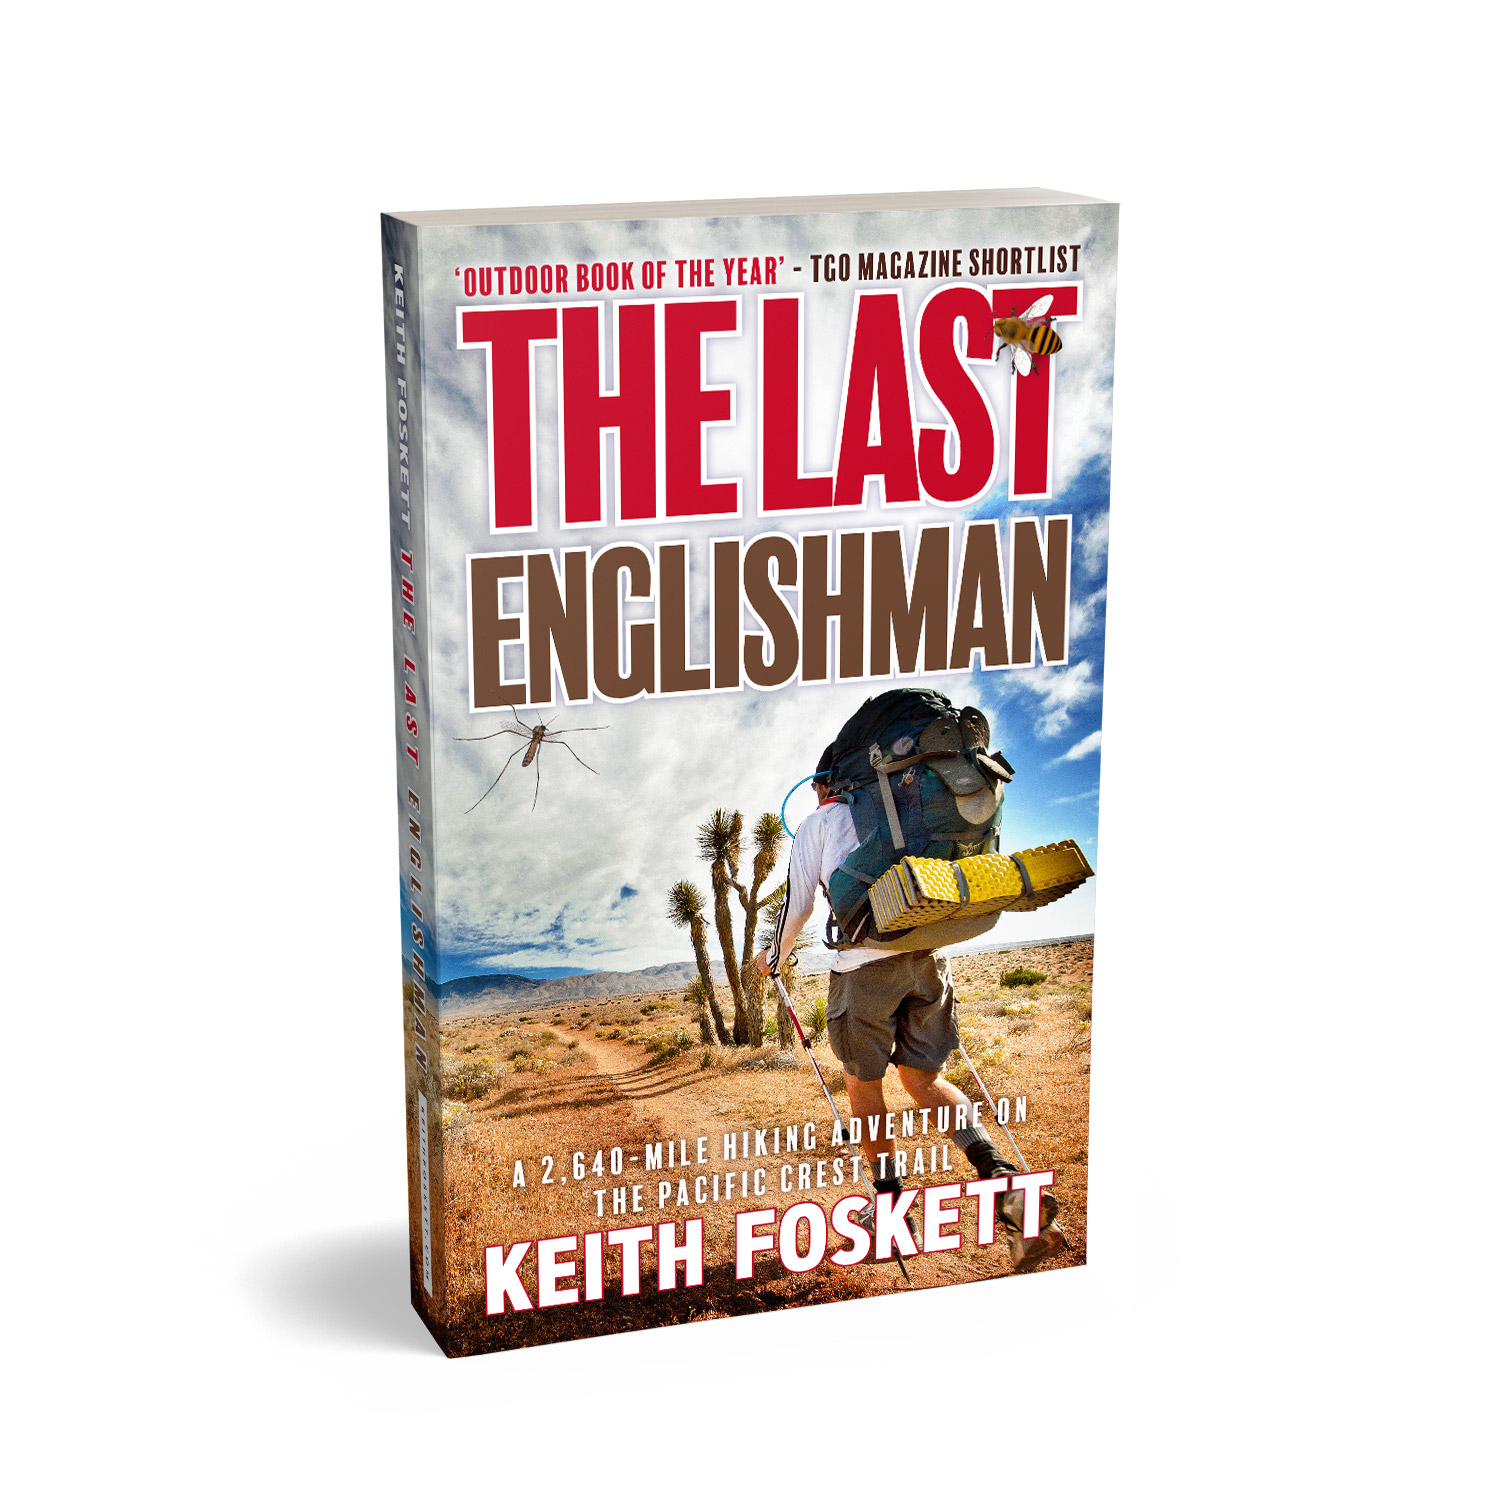 'The Last Englishman' is an excellent humorous walking memoir, about one man's trek along the Pacific Coast Trail. The author is Keith Foskett. The book cover was designed by Mark Thomas, of coverness.com. To find out more about my book design services, please visit www.coverness.com.